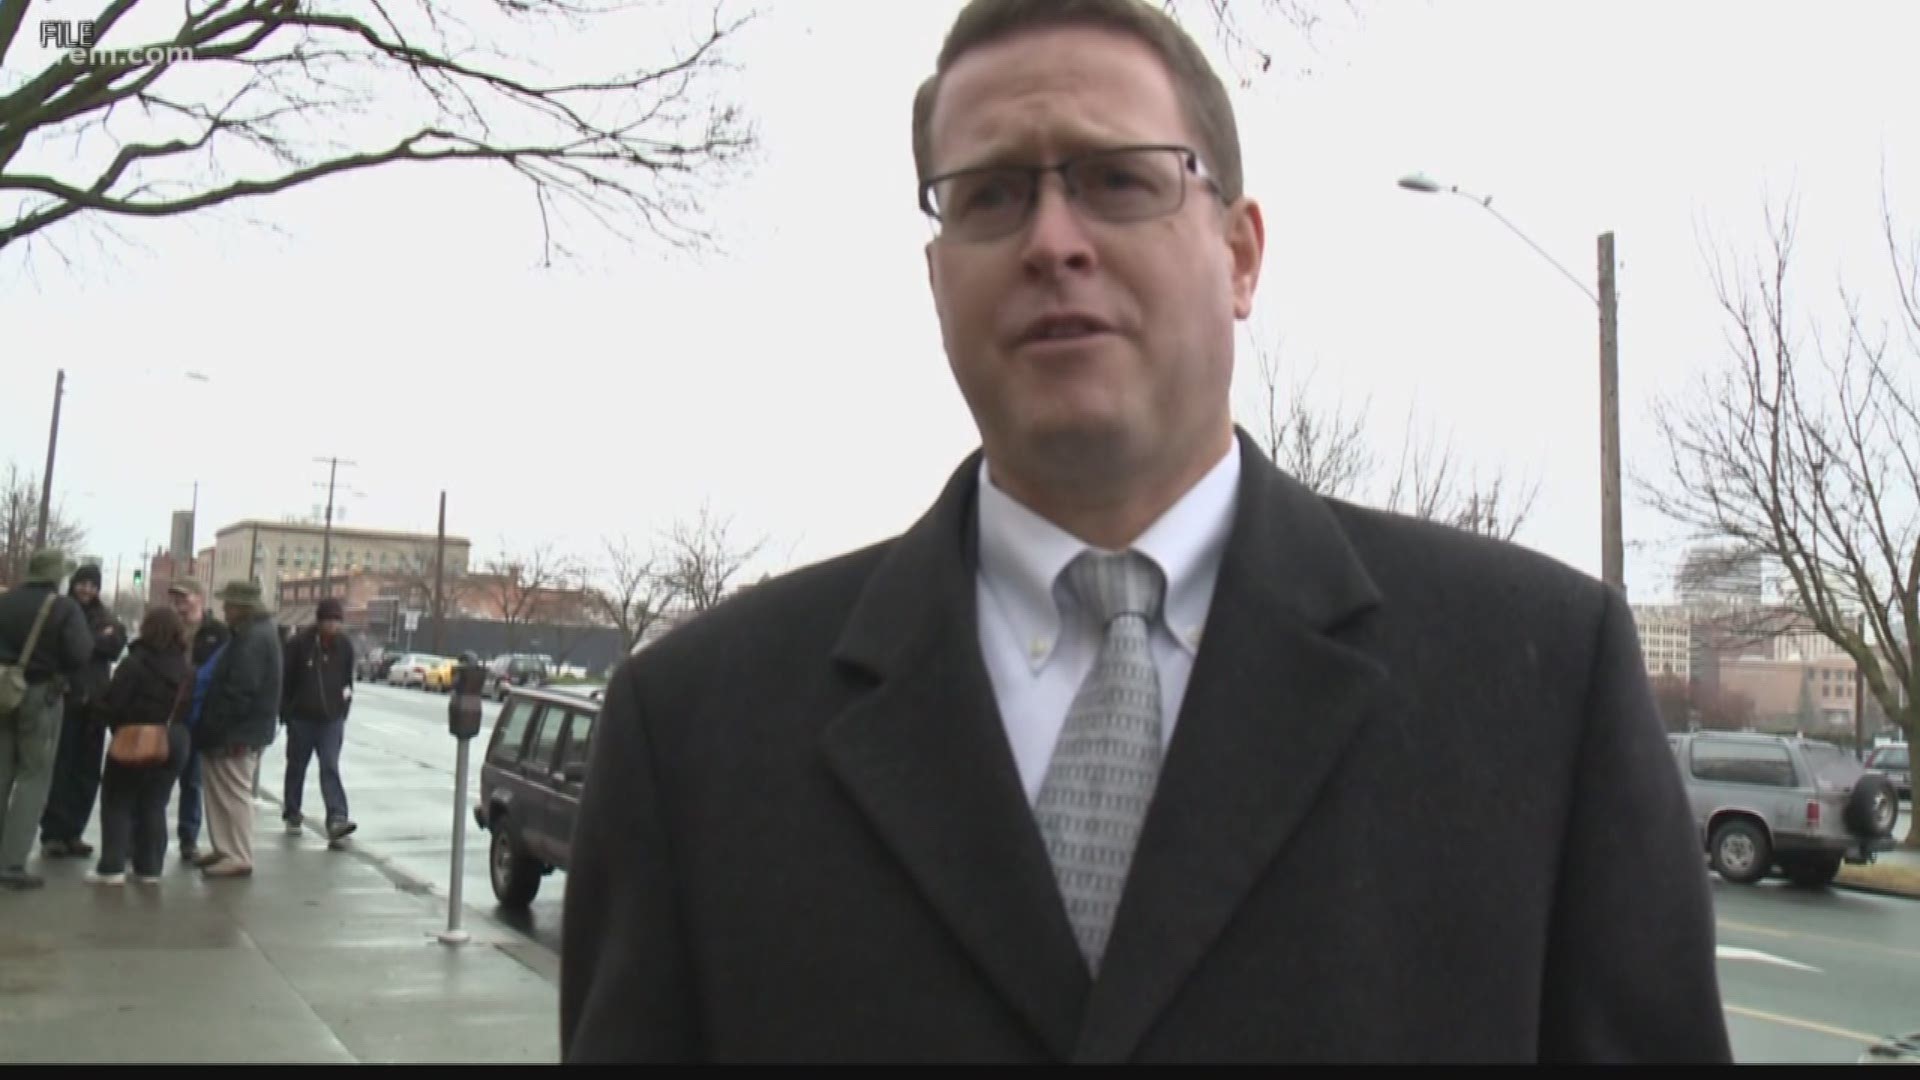 The latest investigative report into Rep. Matt Shea's behavior has sprung a wave of criticism from Spokane area leaders.  KREM's Casey Decker breaks down which candidates have publicly called for Shea's resignation or condemned his behavior.